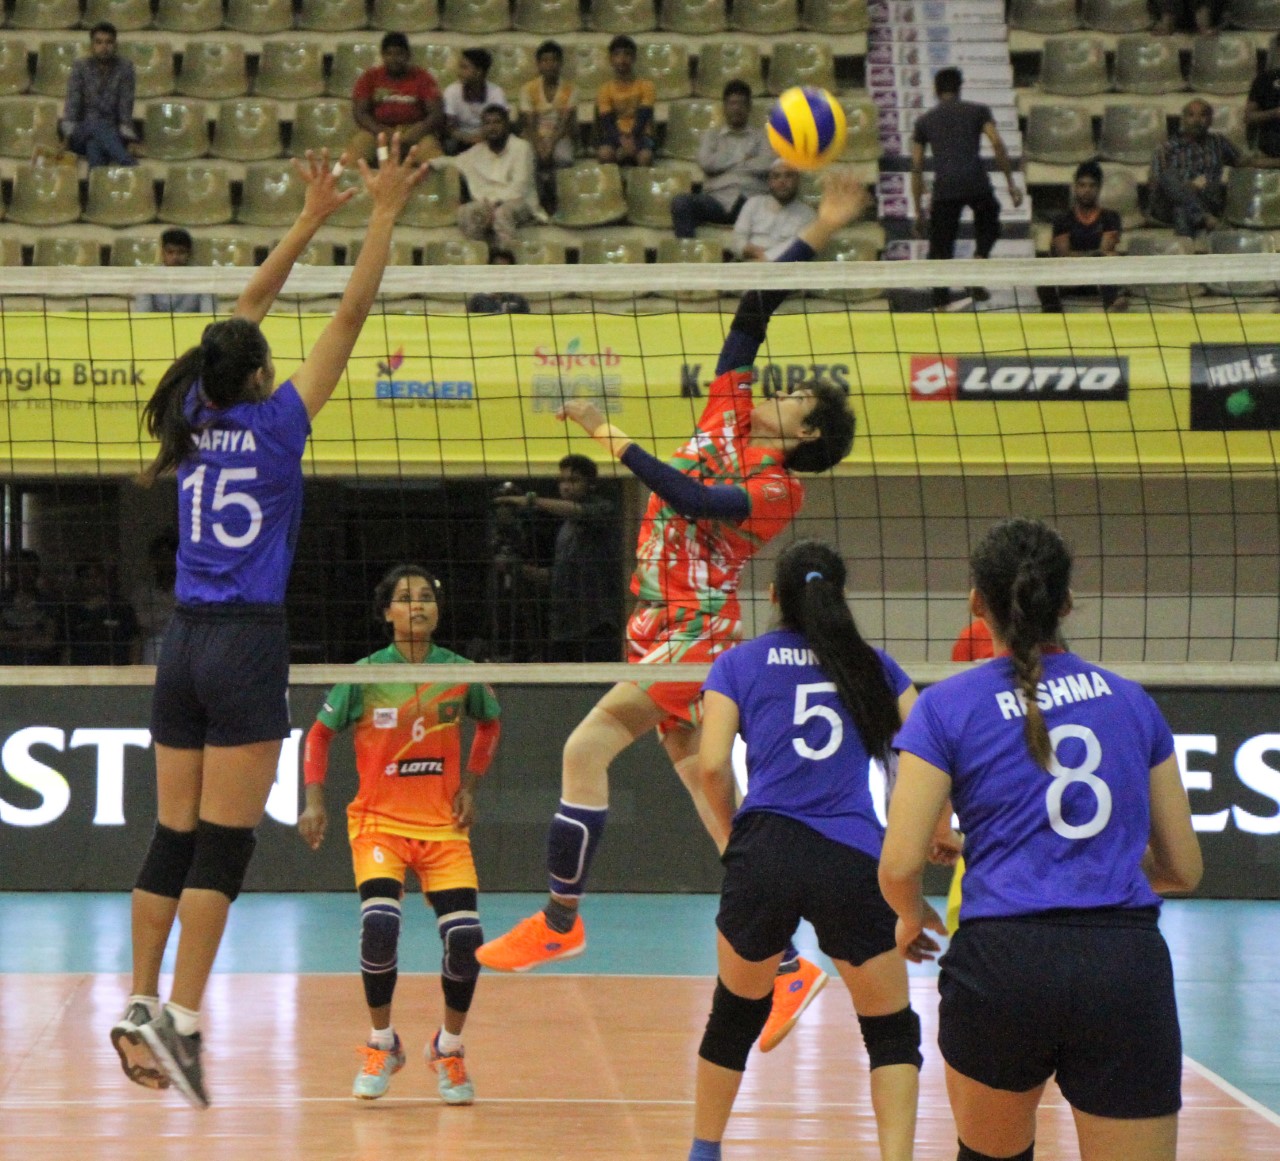 TWO UNBEATEN TEAMS NEPAL, MALDIVES TO FACE OFF FOR GOLD MEDAL